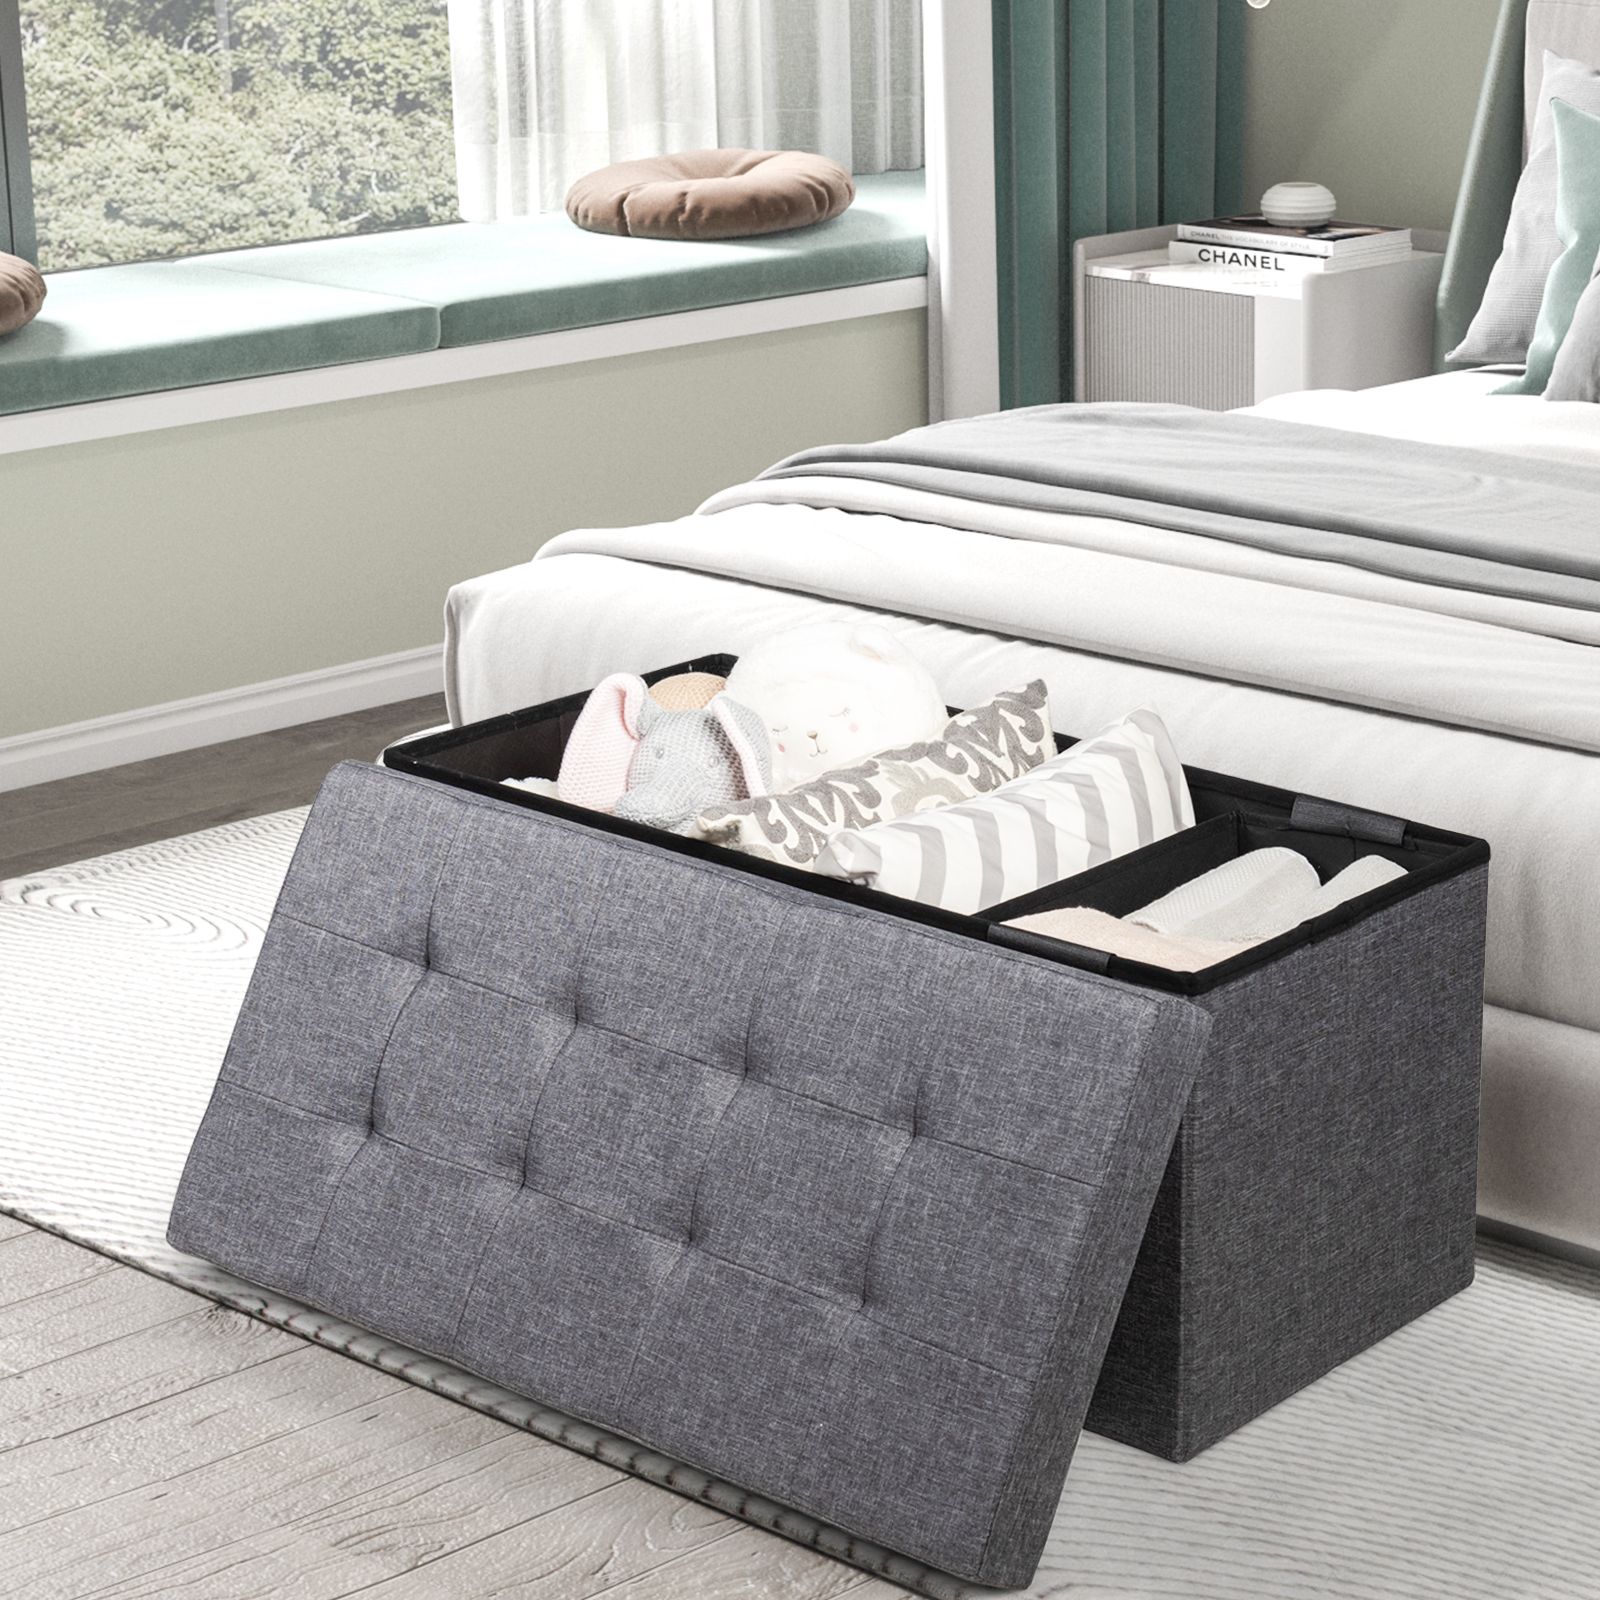 Fabric Foldable Storage Ottoman with Padded Seat for Living Room Dark Grey